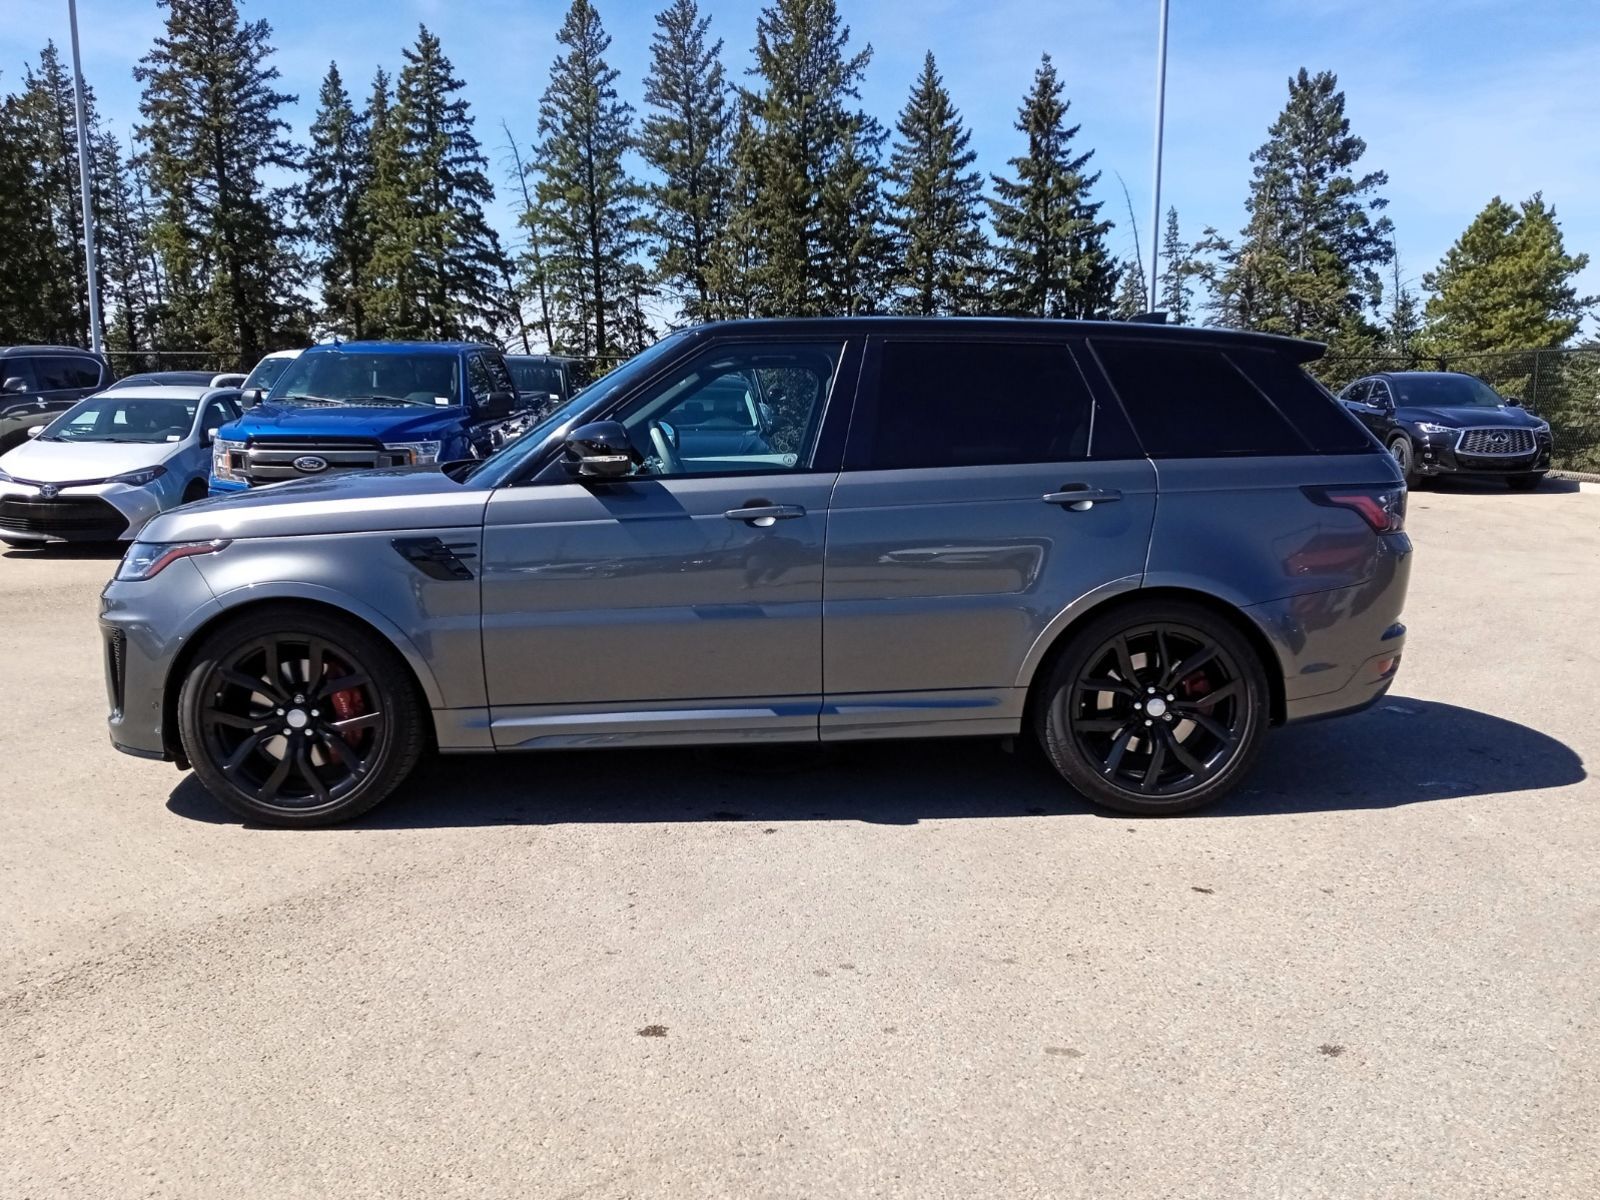 2018 Land Rover Range Rover Sport SVR, 575HP, LEATHER, PANO-ROOF, NAVIGATION